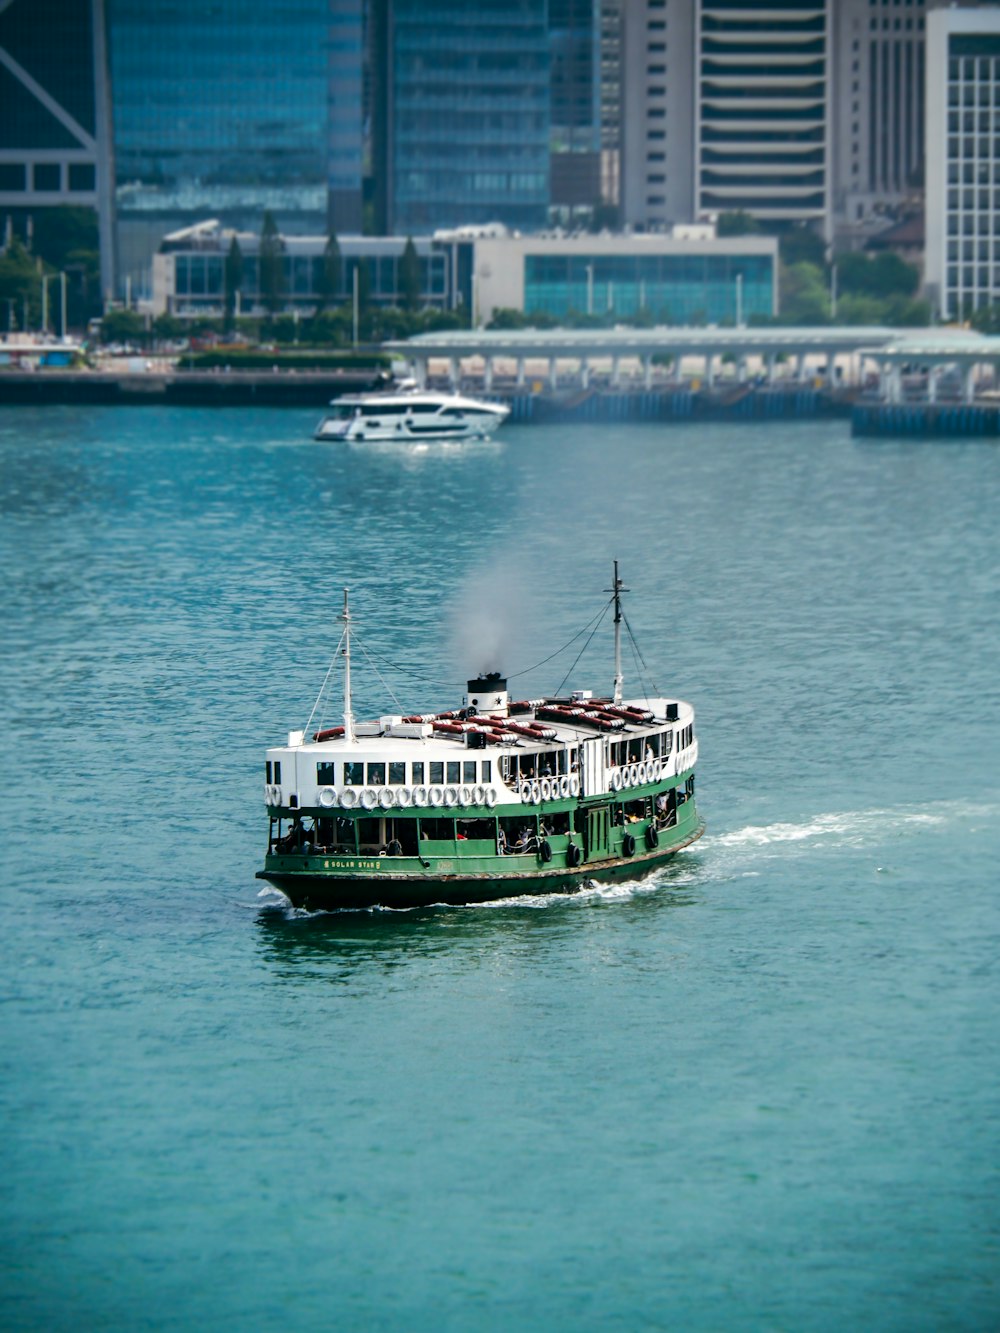 a green and white boat traveling on a body of water